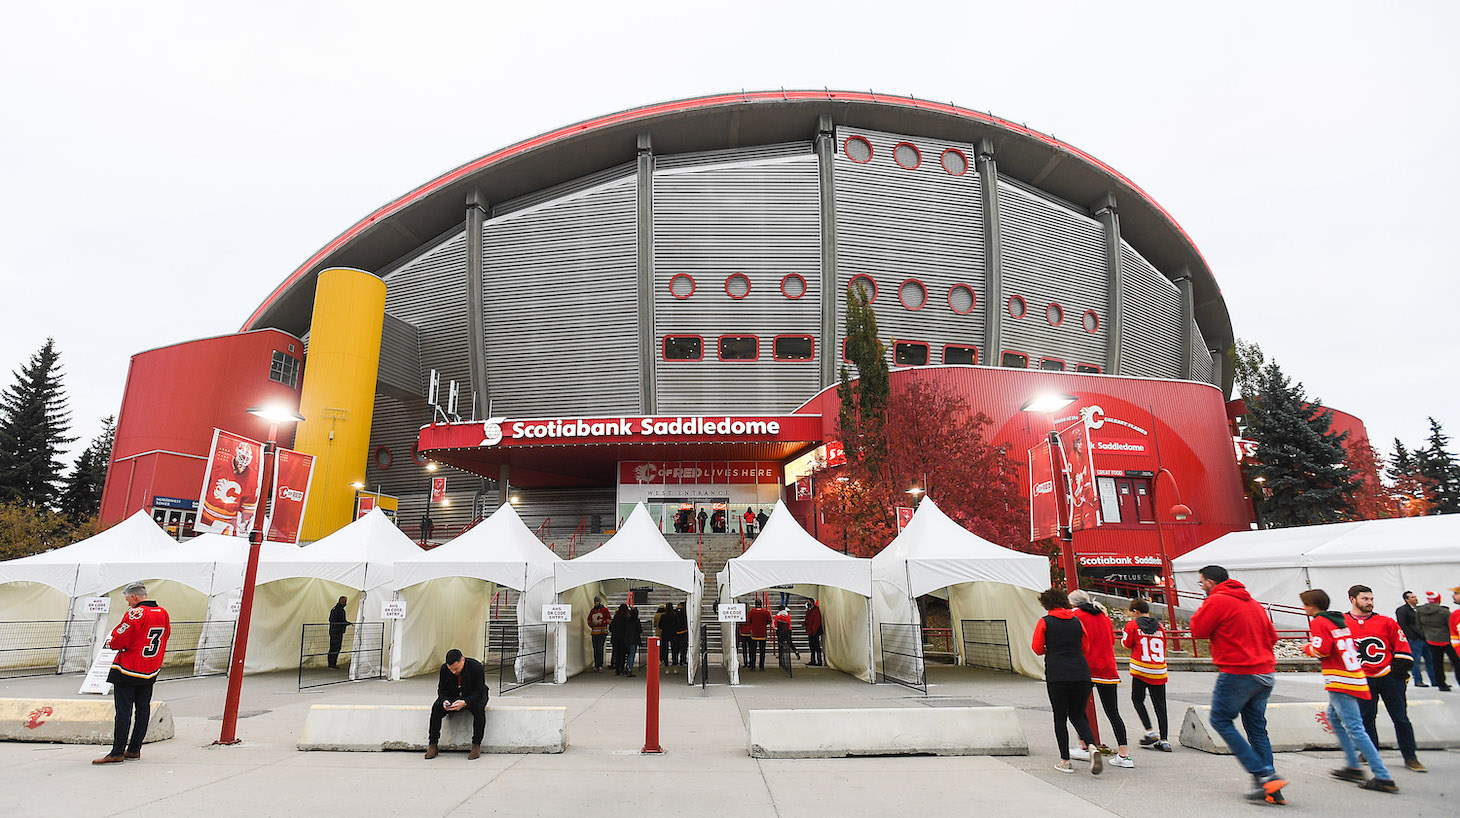 CALGARY, AB - OCTOBER 18: A general view of the exterior of Scotiabank Saddledome as fans arrive and are checked for their Covid vaccinations prior to an NHL game between the Calgary Flames and the Anaheim Ducks on October 18, 2021 in Calgary, Alberta, Canada. (Photo by Derek Leung/Getty Images)